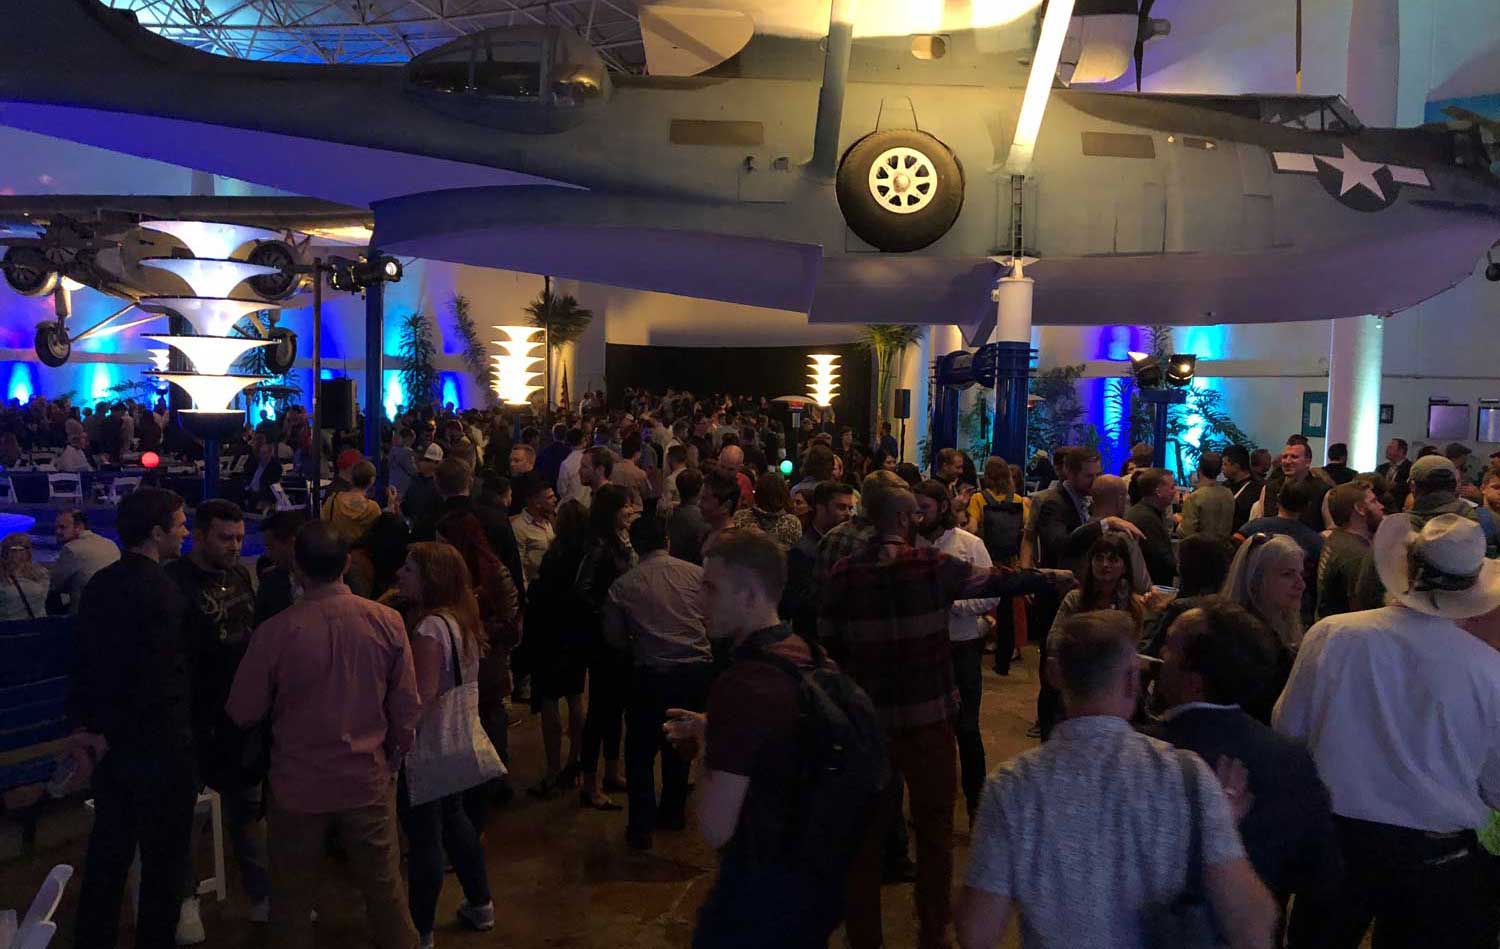 The annual Land F/X party was a full flight at the San Diego Air & Space Museum. No switching seats! ASLA 2019, San Diego.